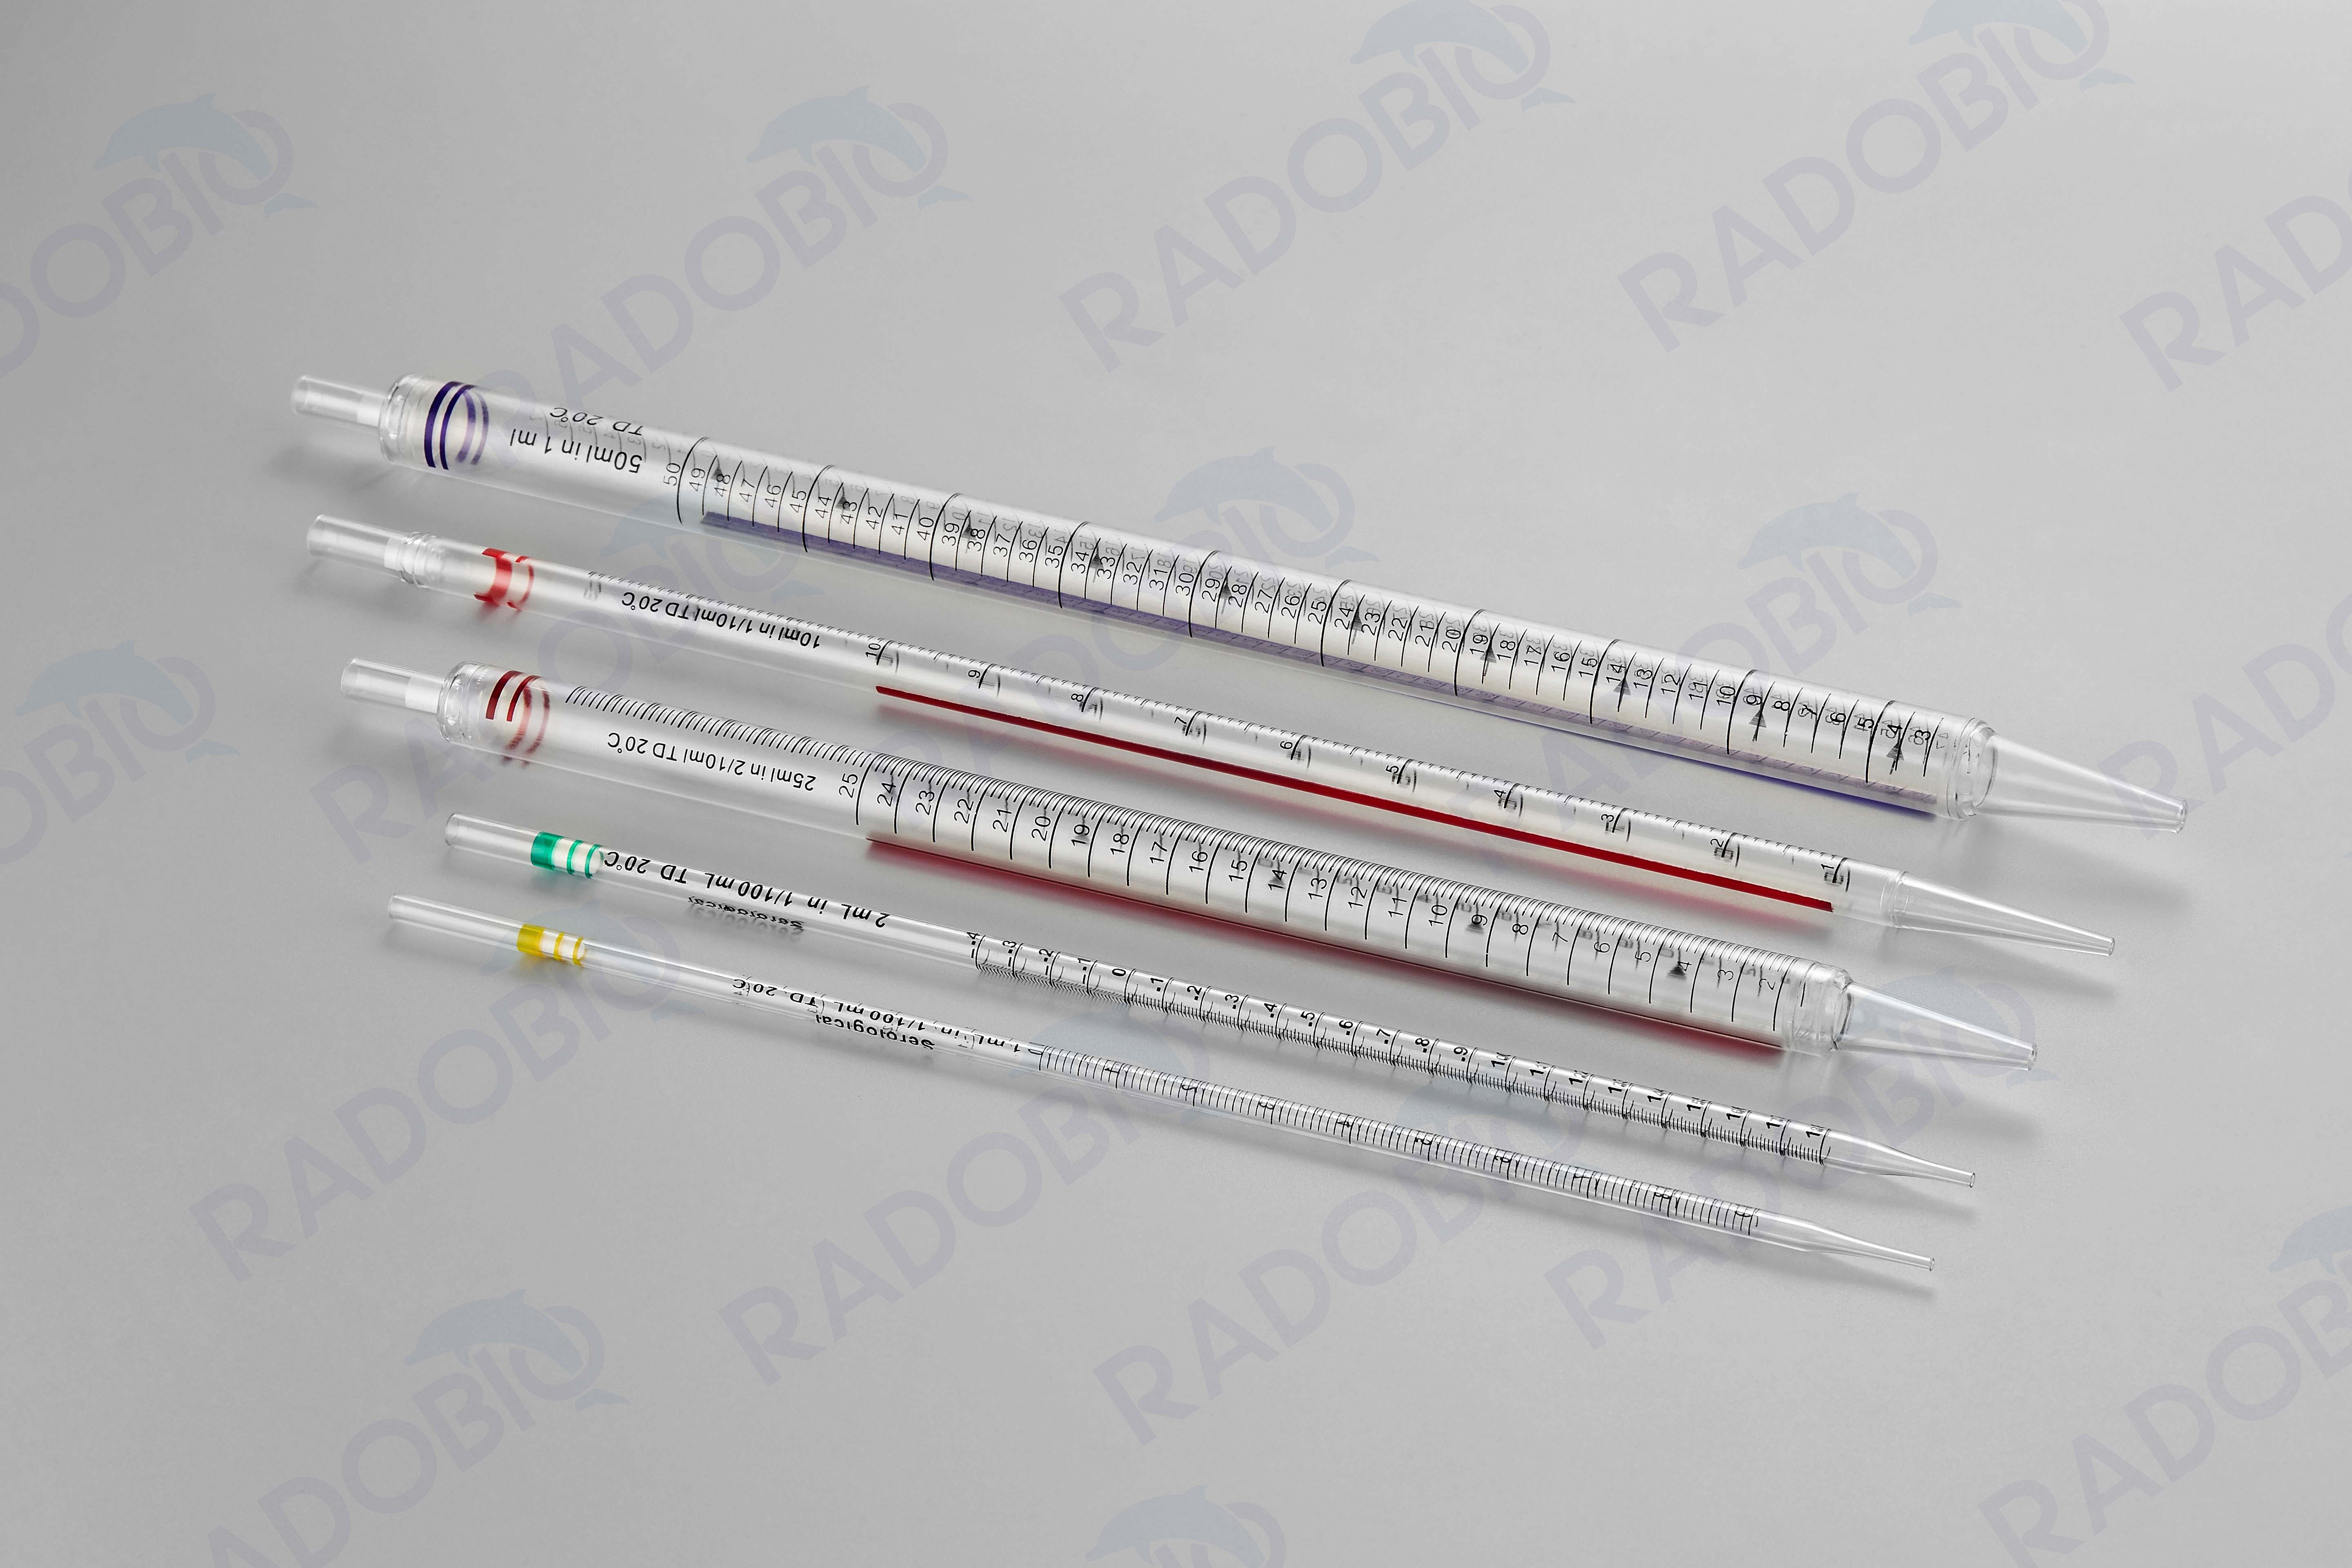 Serological Pipette Featured Image